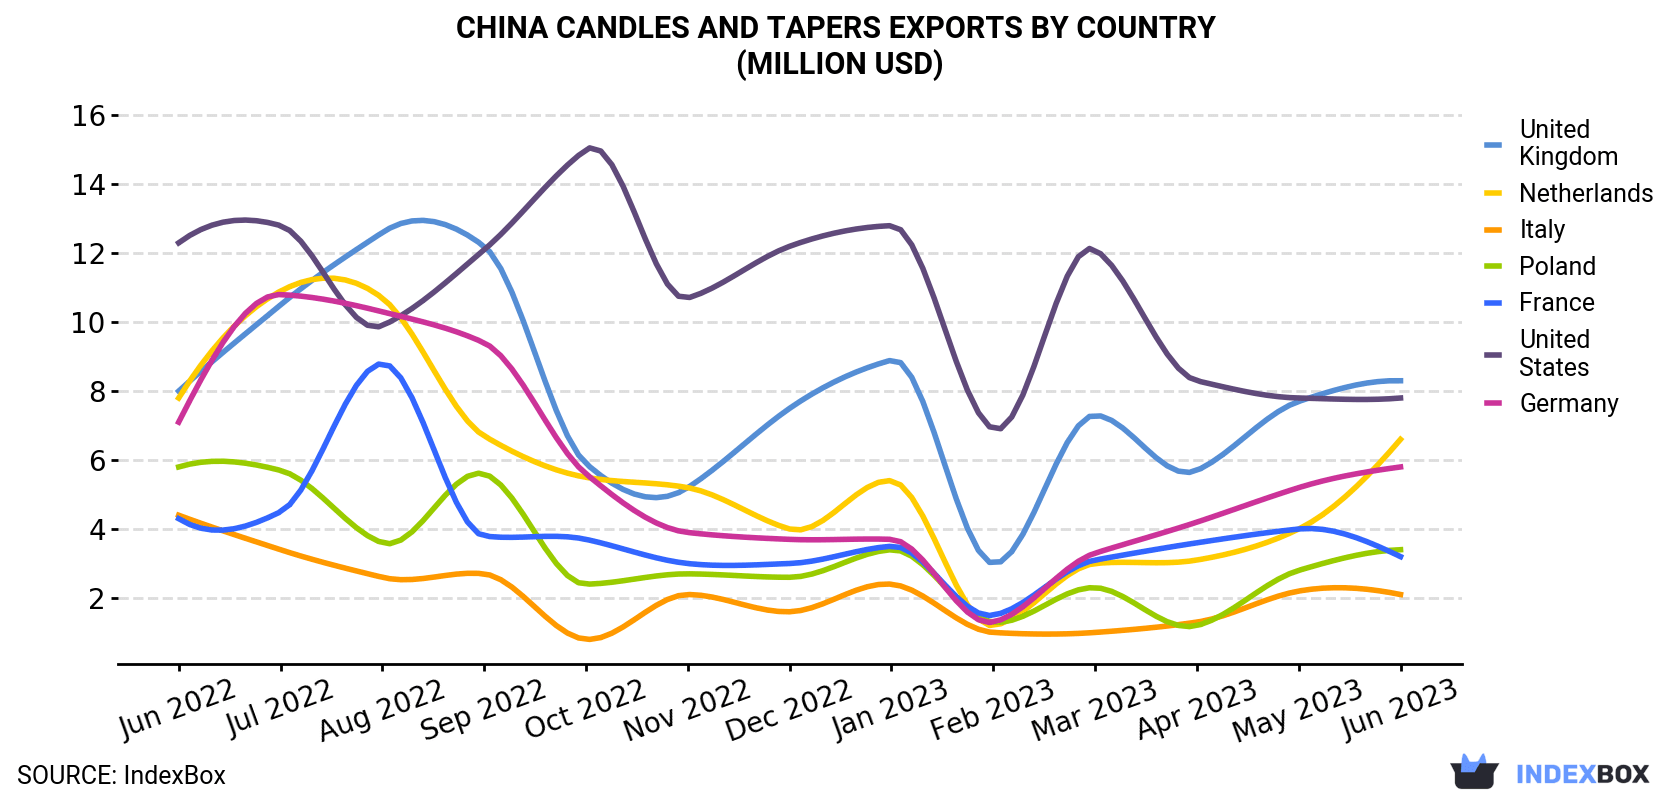 China Candles And Tapers Exports By Country (Million USD)